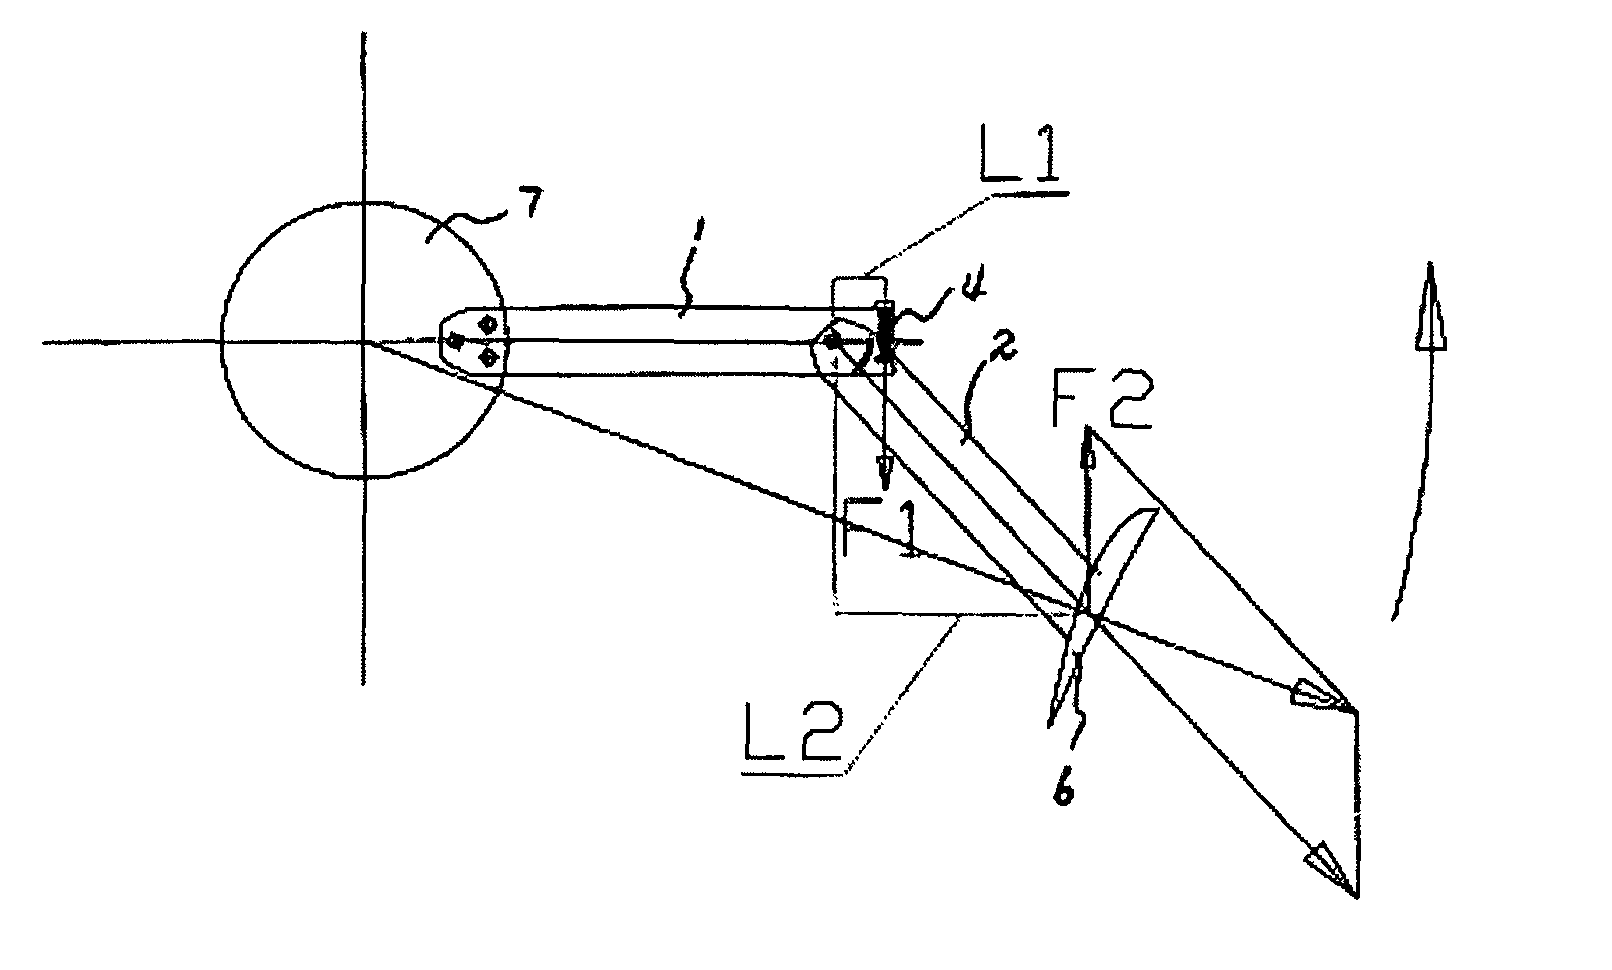 Blade support limb for vertical axis wind turbine